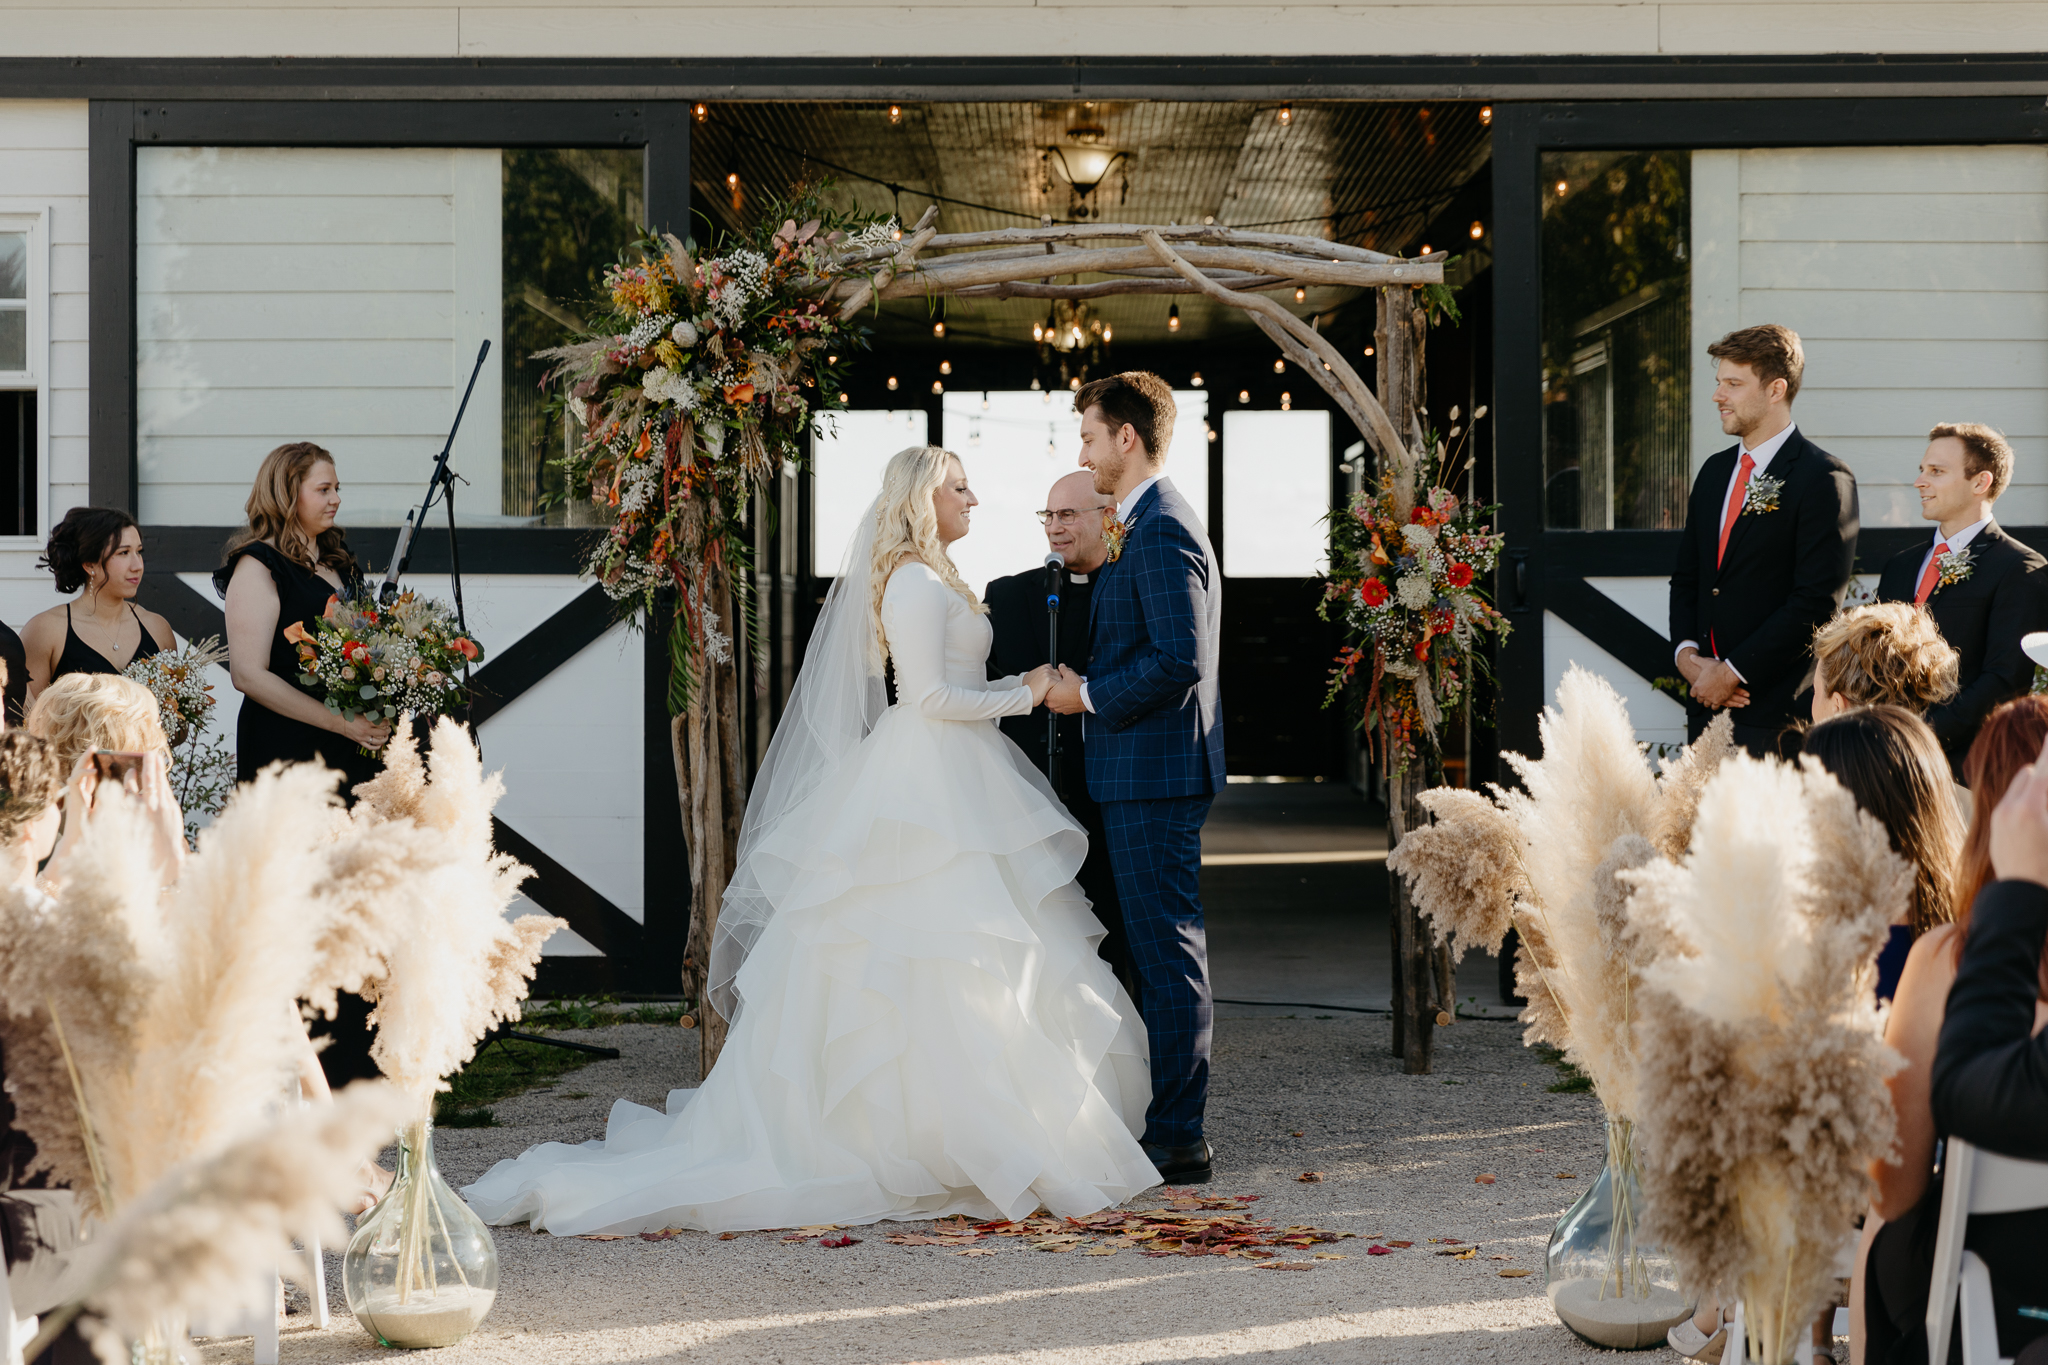 Bride and groom laugh and smile at each other while holding hands during their outdoor horse farm wedding in fall